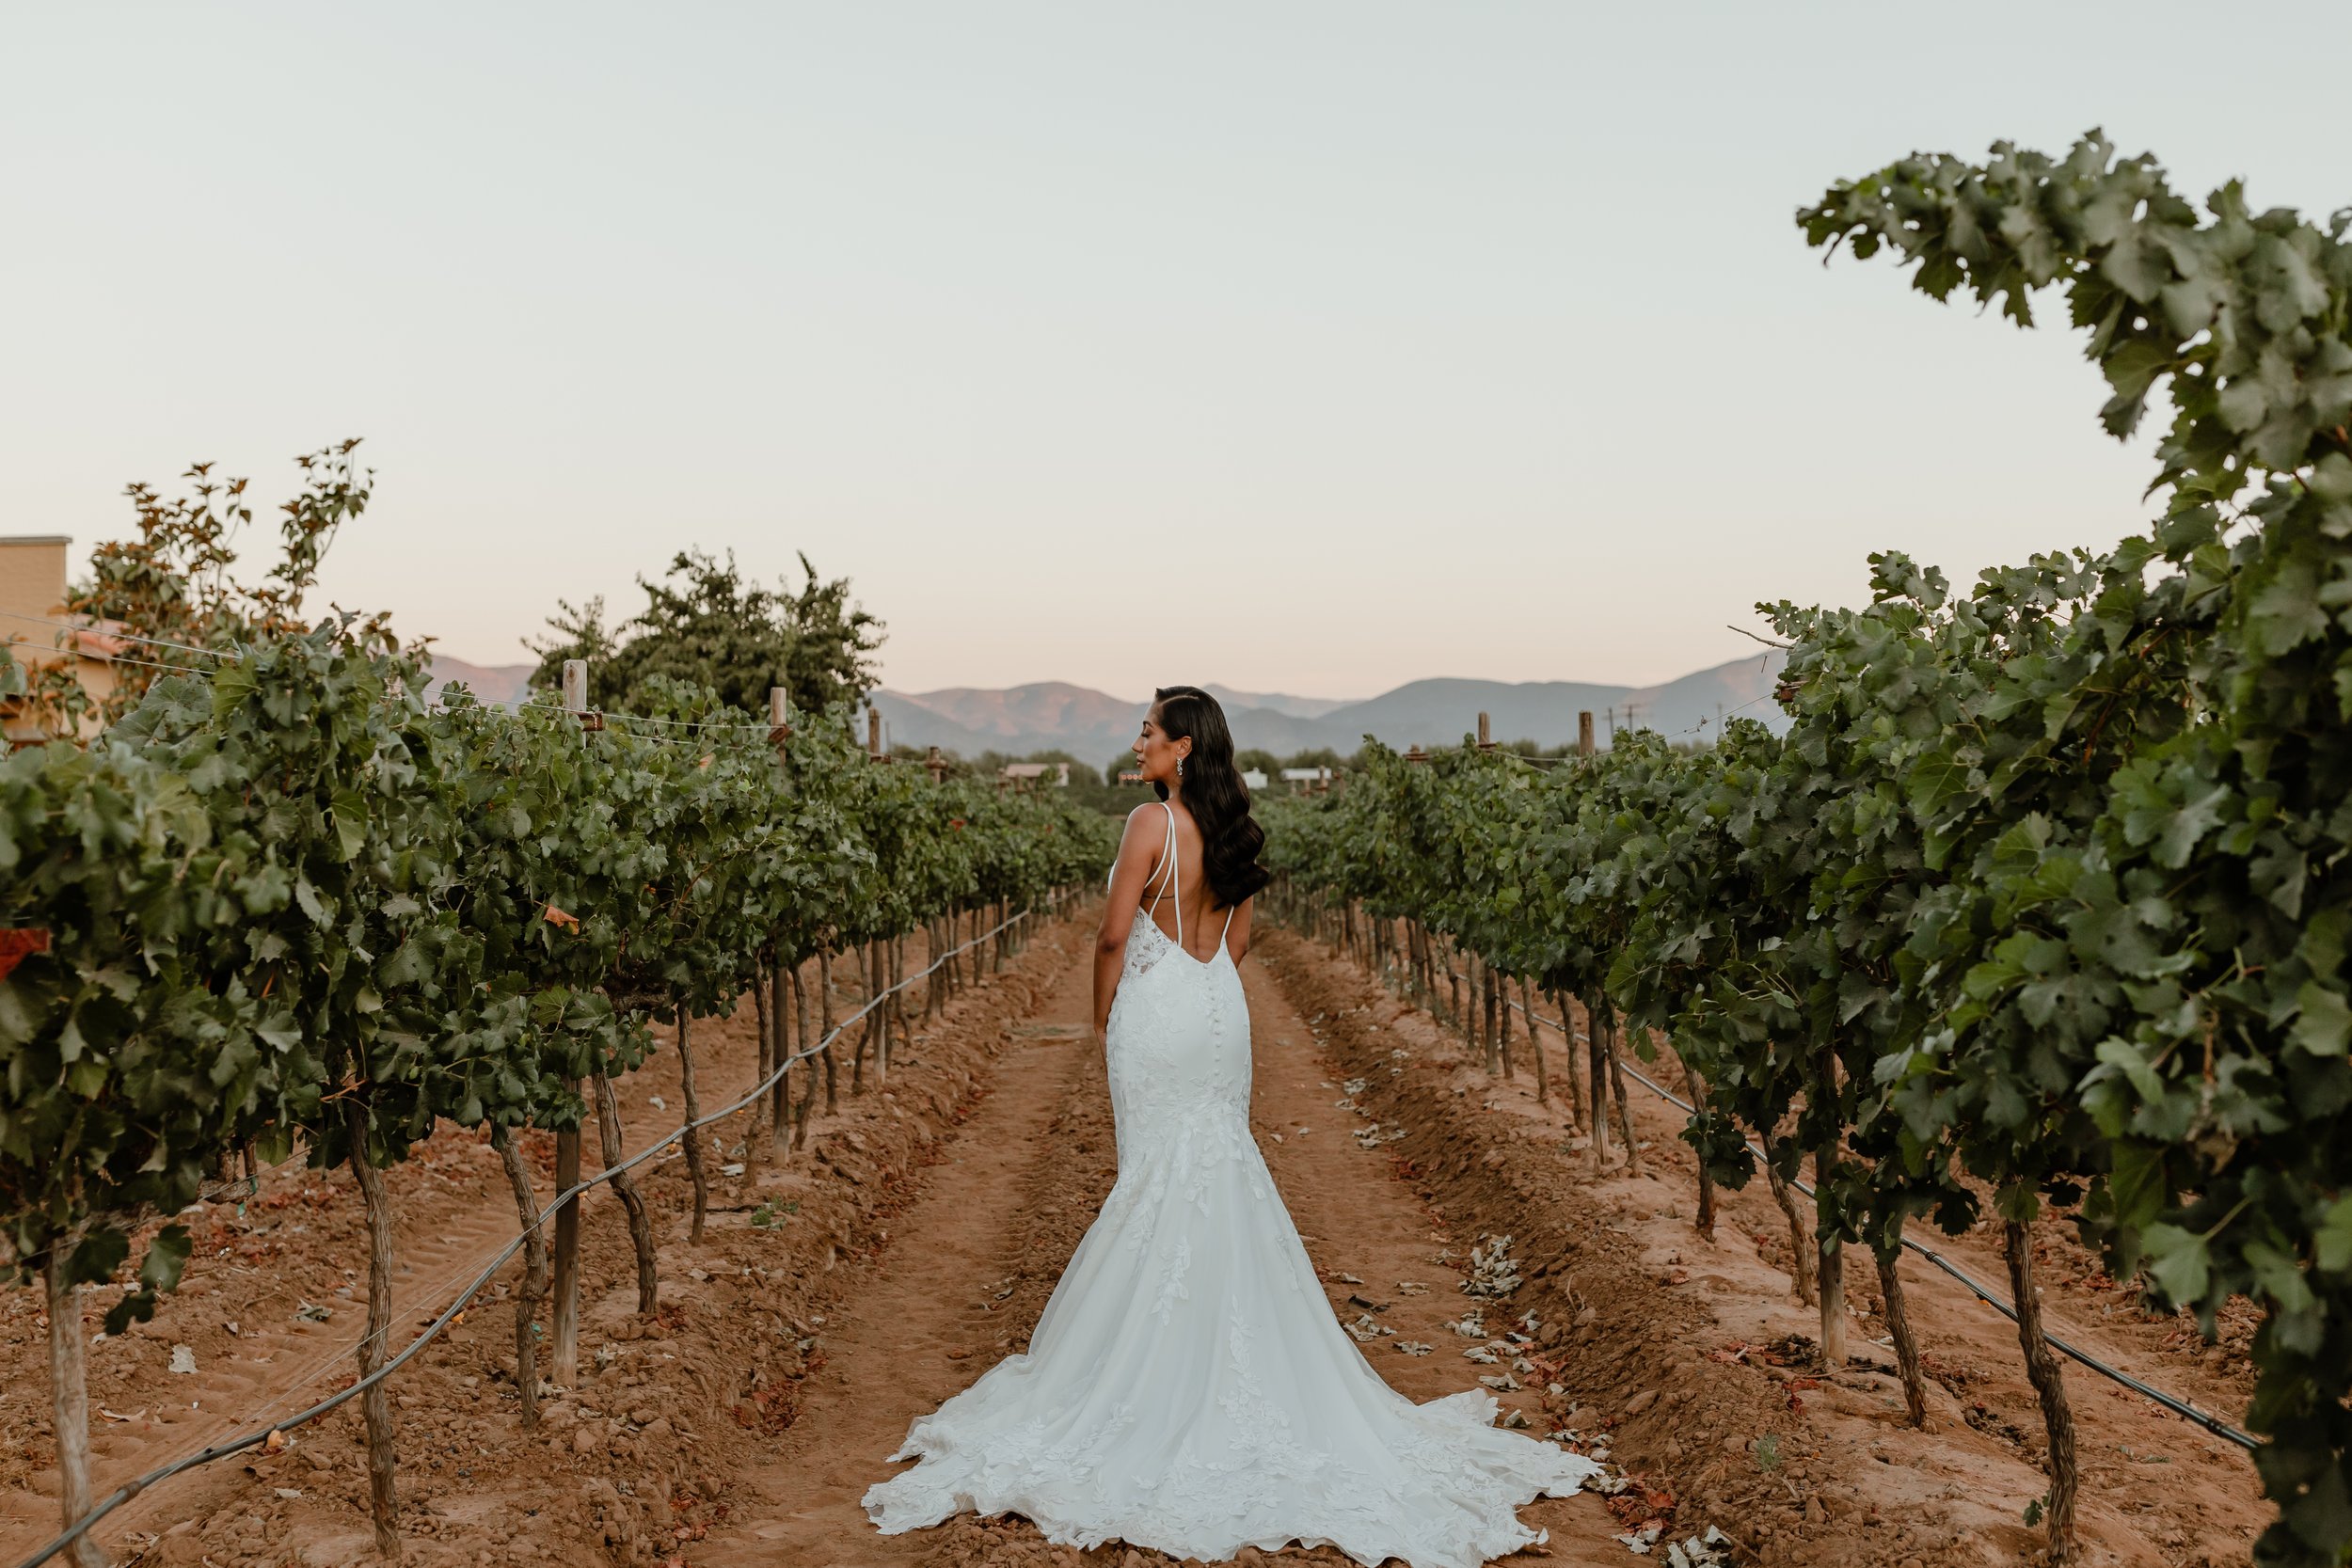  Krystina and Ryan's Wedding in Valle de Guadalupe, Baja, MX - Eve Rox Photography 